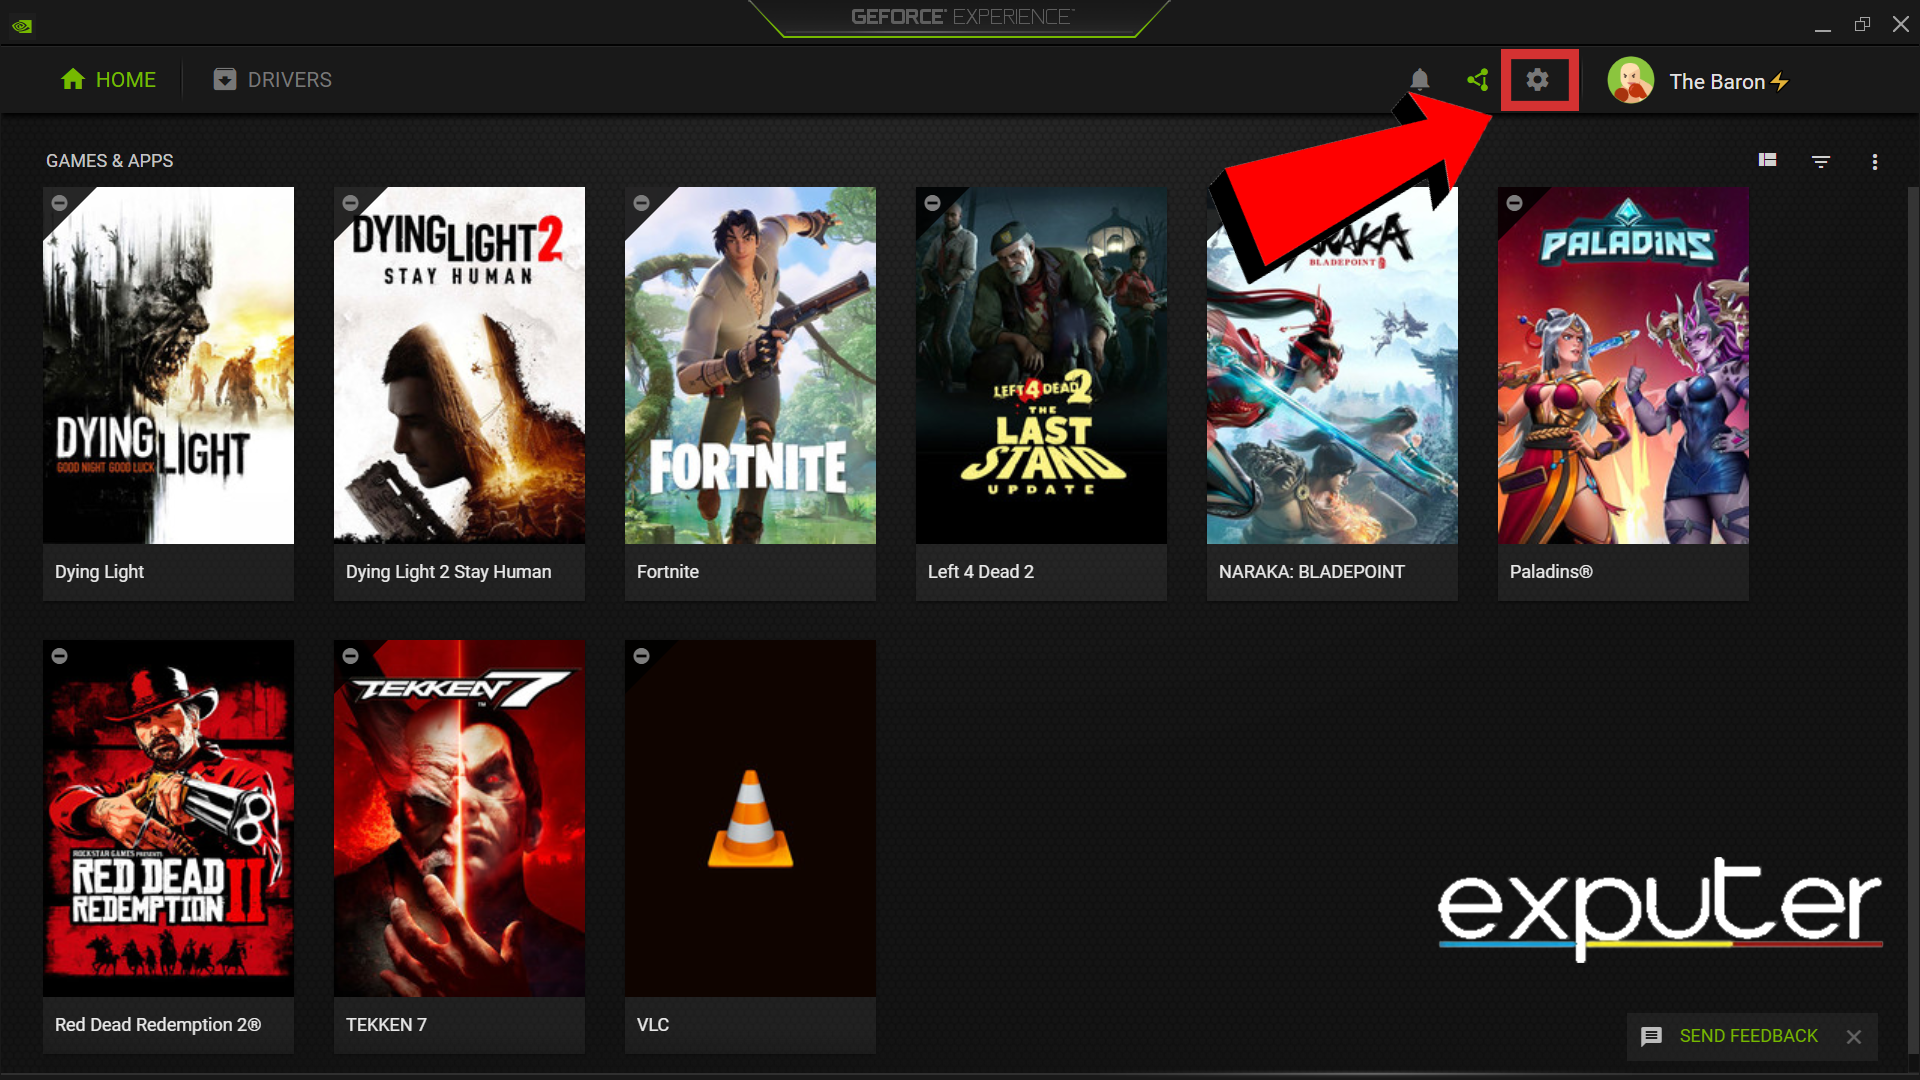 Opening Nvidia GeForce Experience Settings. (image taken by eXputer)